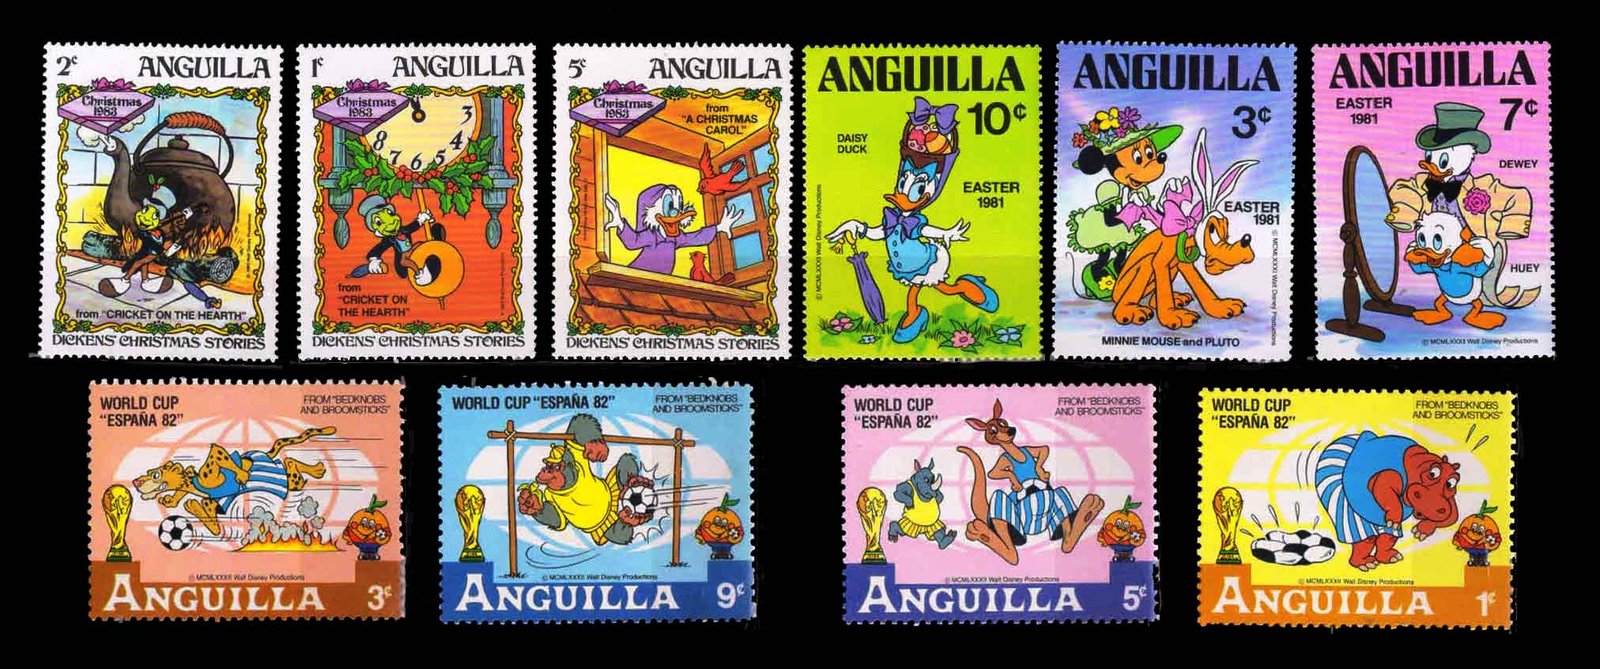 ANGUILLA - 10 Different, Large, Disney Cartoon Stamps